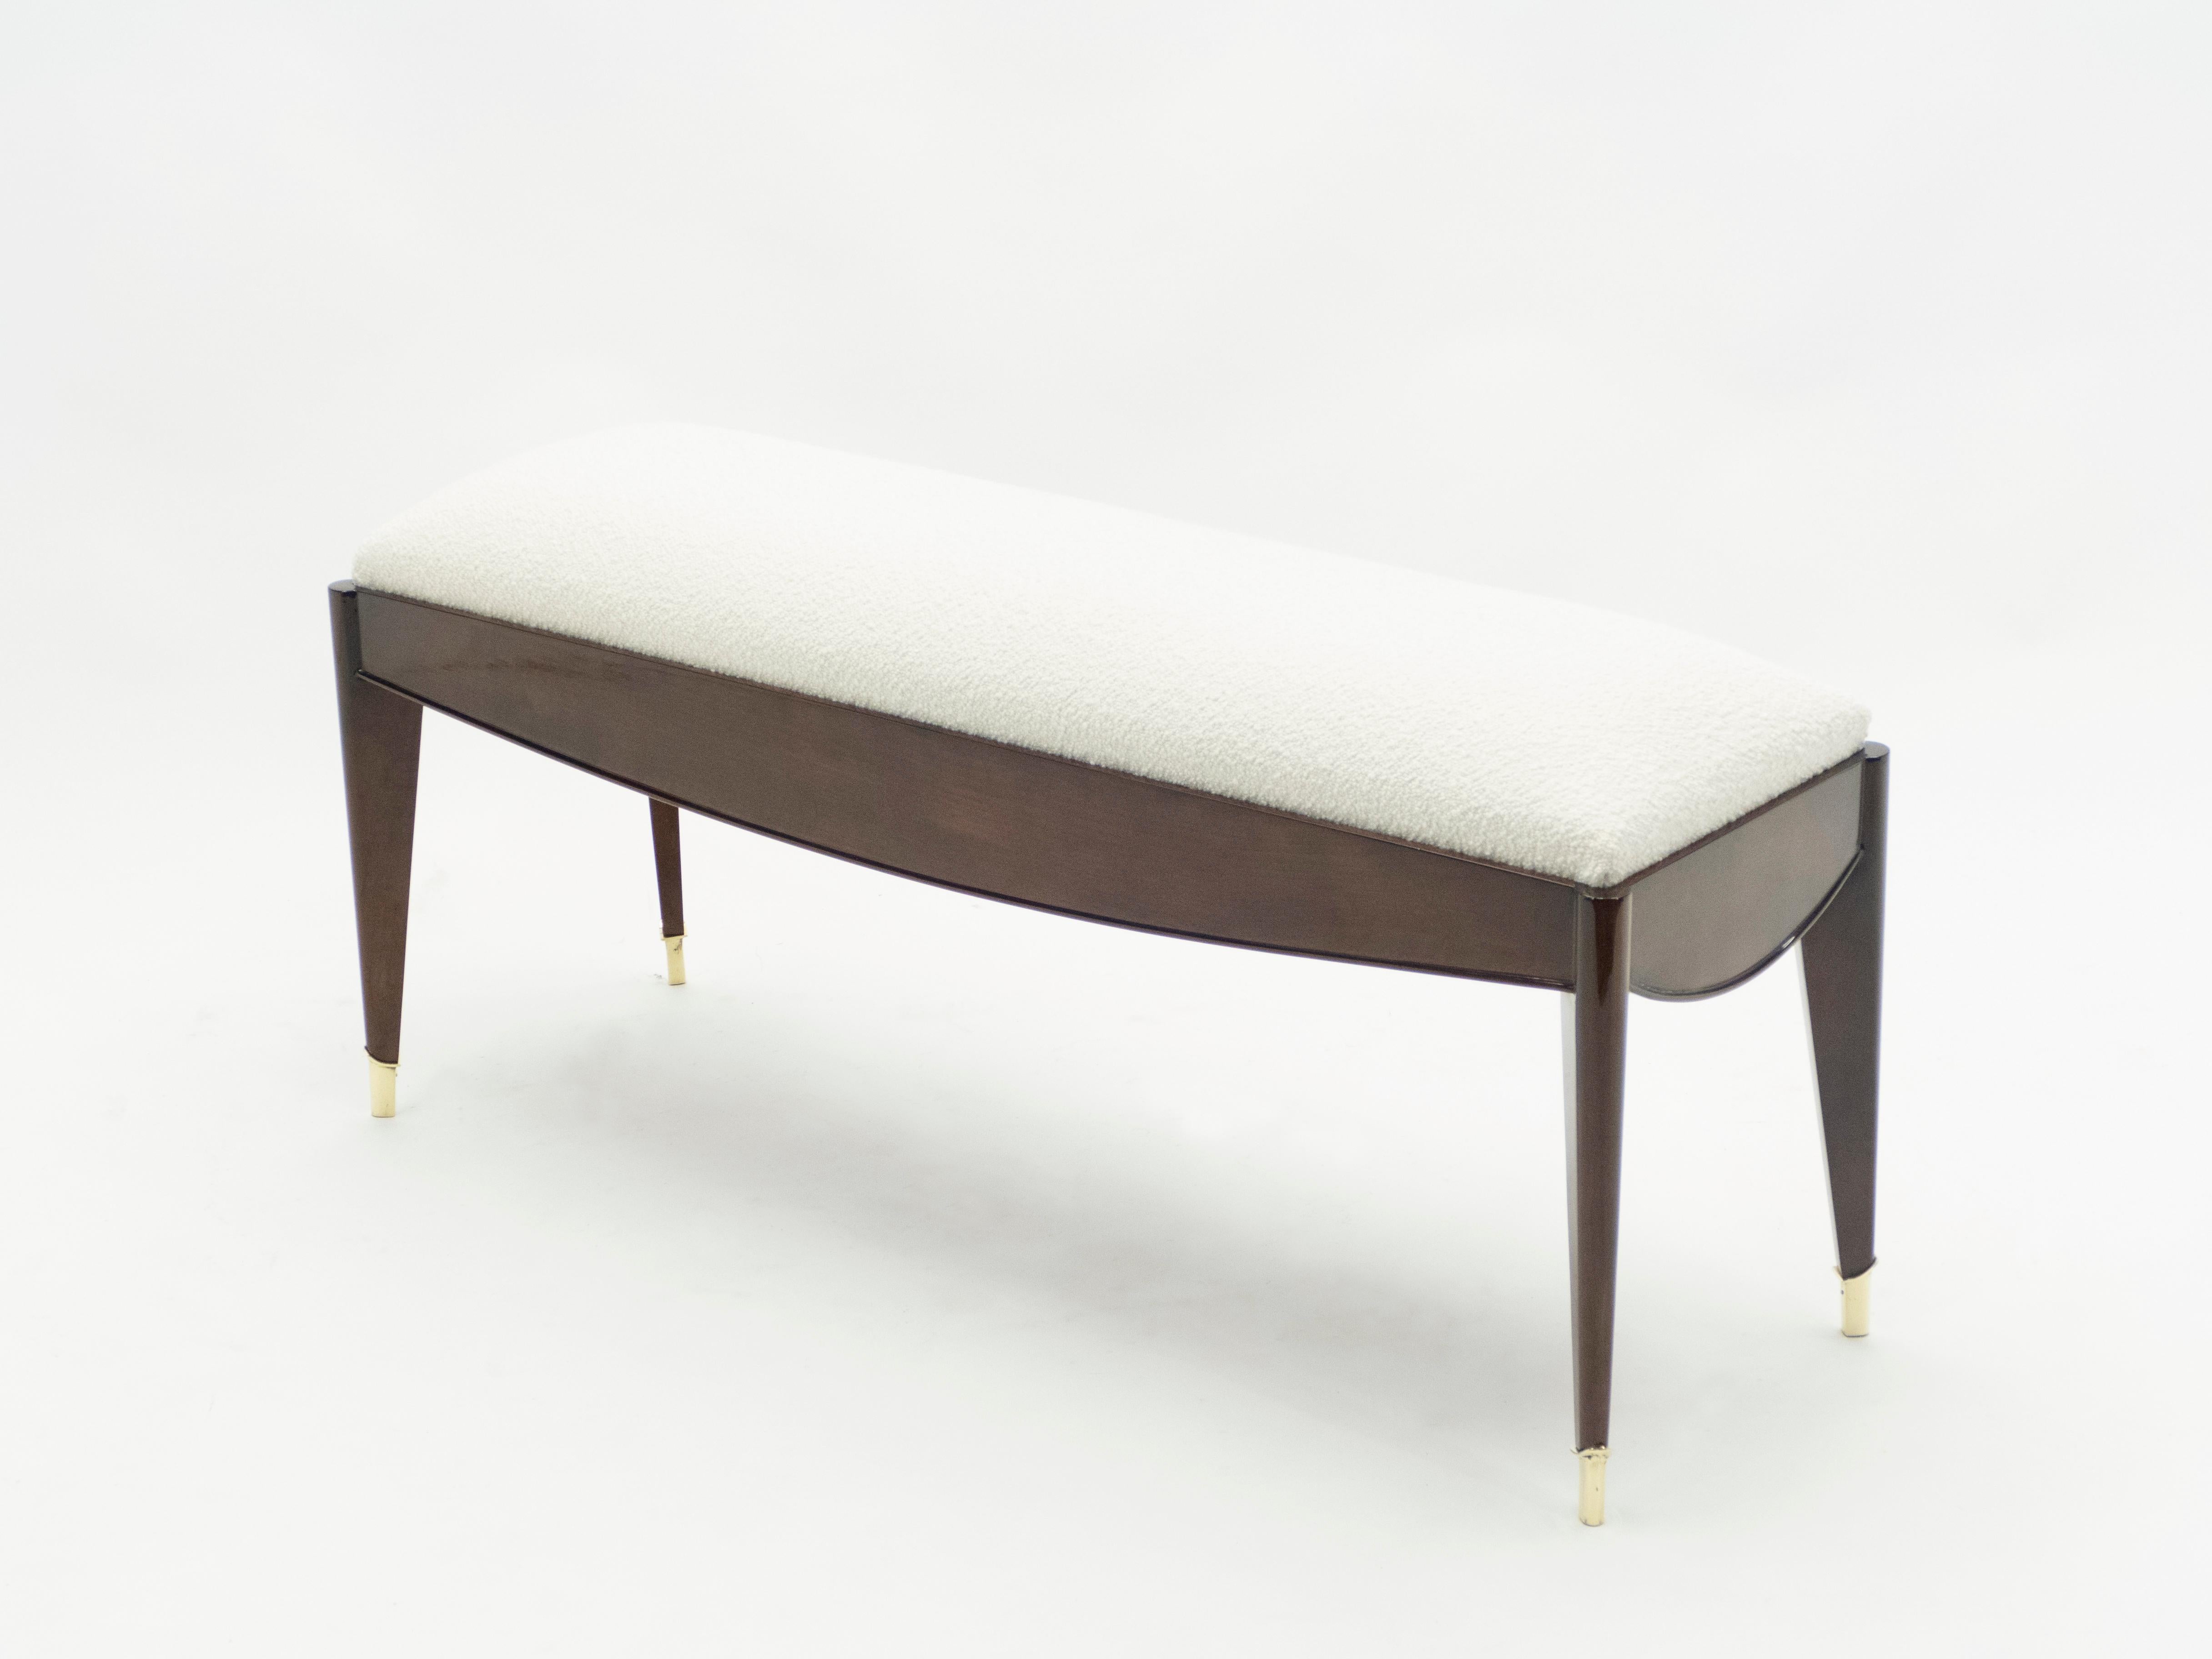 This beautiful French Art Deco bench was made in solid tinted walnut in the early 1940s by la Maison Dominique. The woodwork, pure line and brass sabots is just wonderful. Fully restored and newly upholstered with a wool bouclé from Lelièvre. This